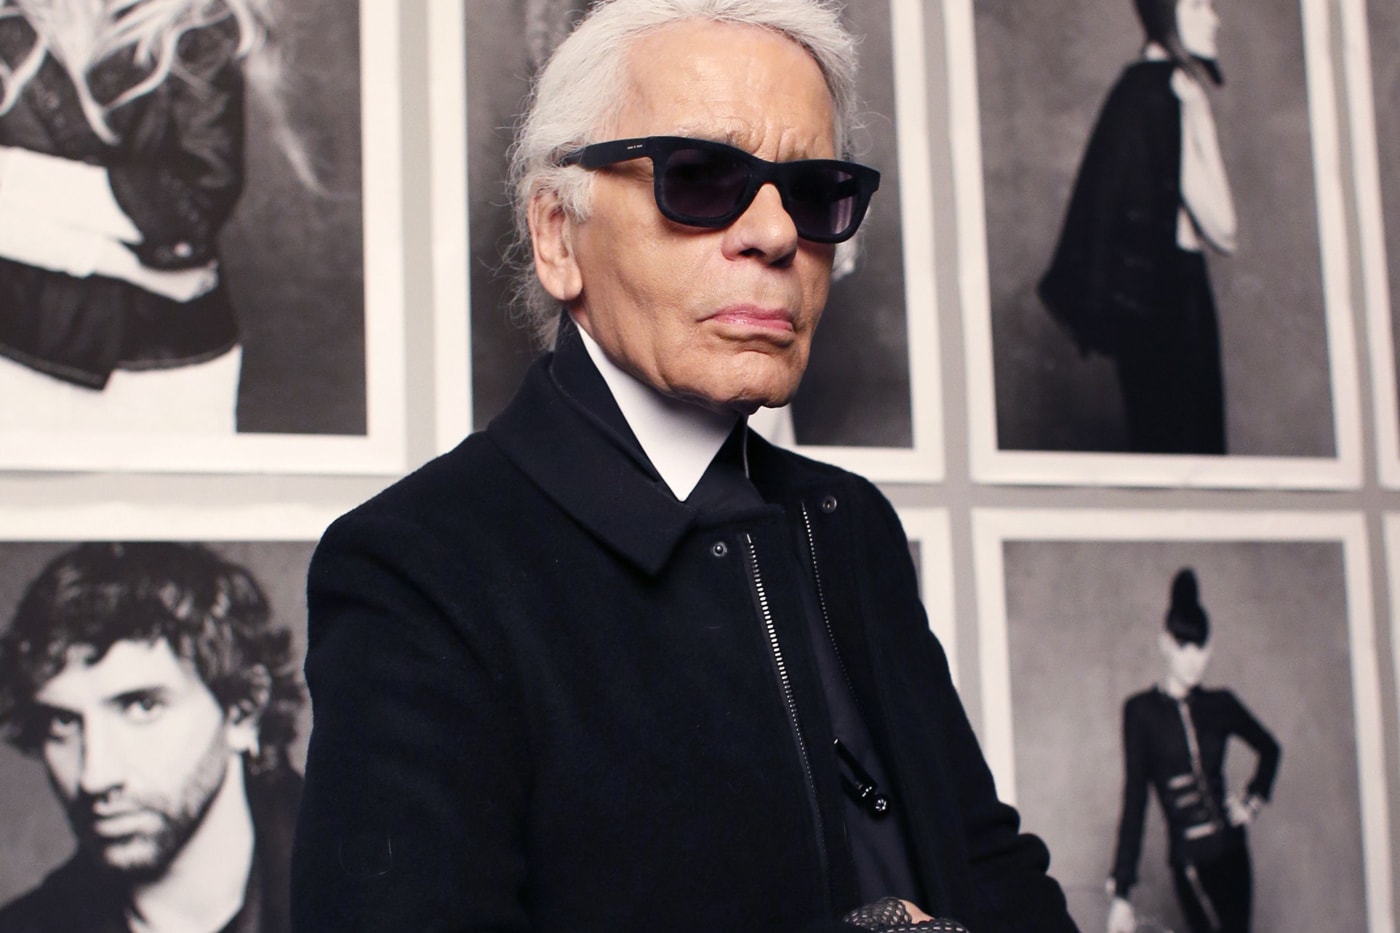 The Met Museum Reveals Details Regarding Upcoming Karl Lagerfeld Exhibition tisch anna wintour a line of beauty wendy yu